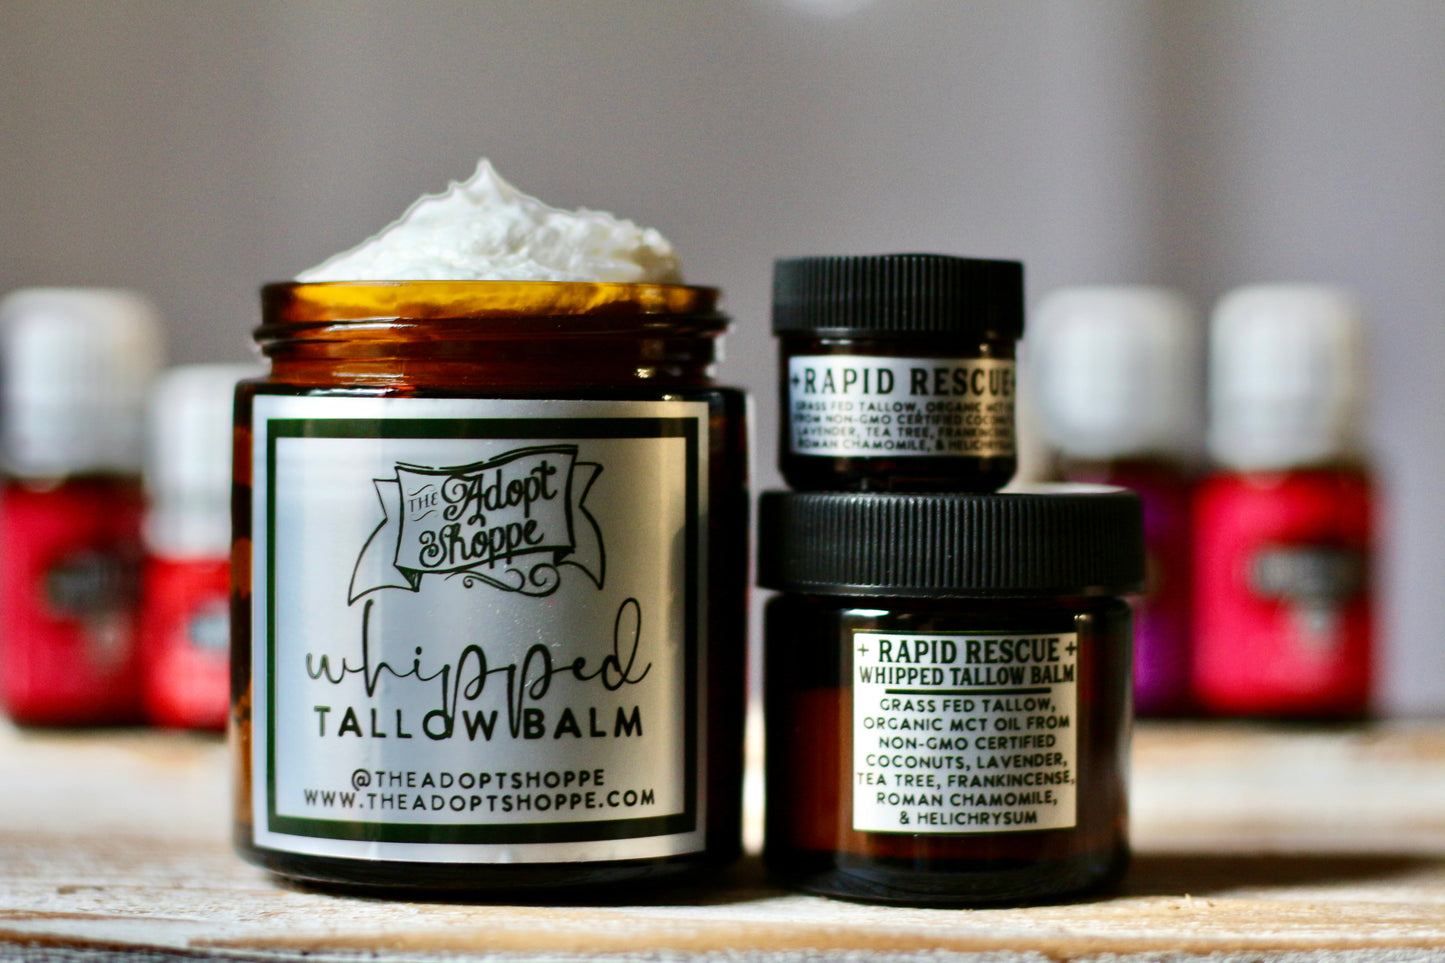 RAPID RESCUE whipped tallow balm